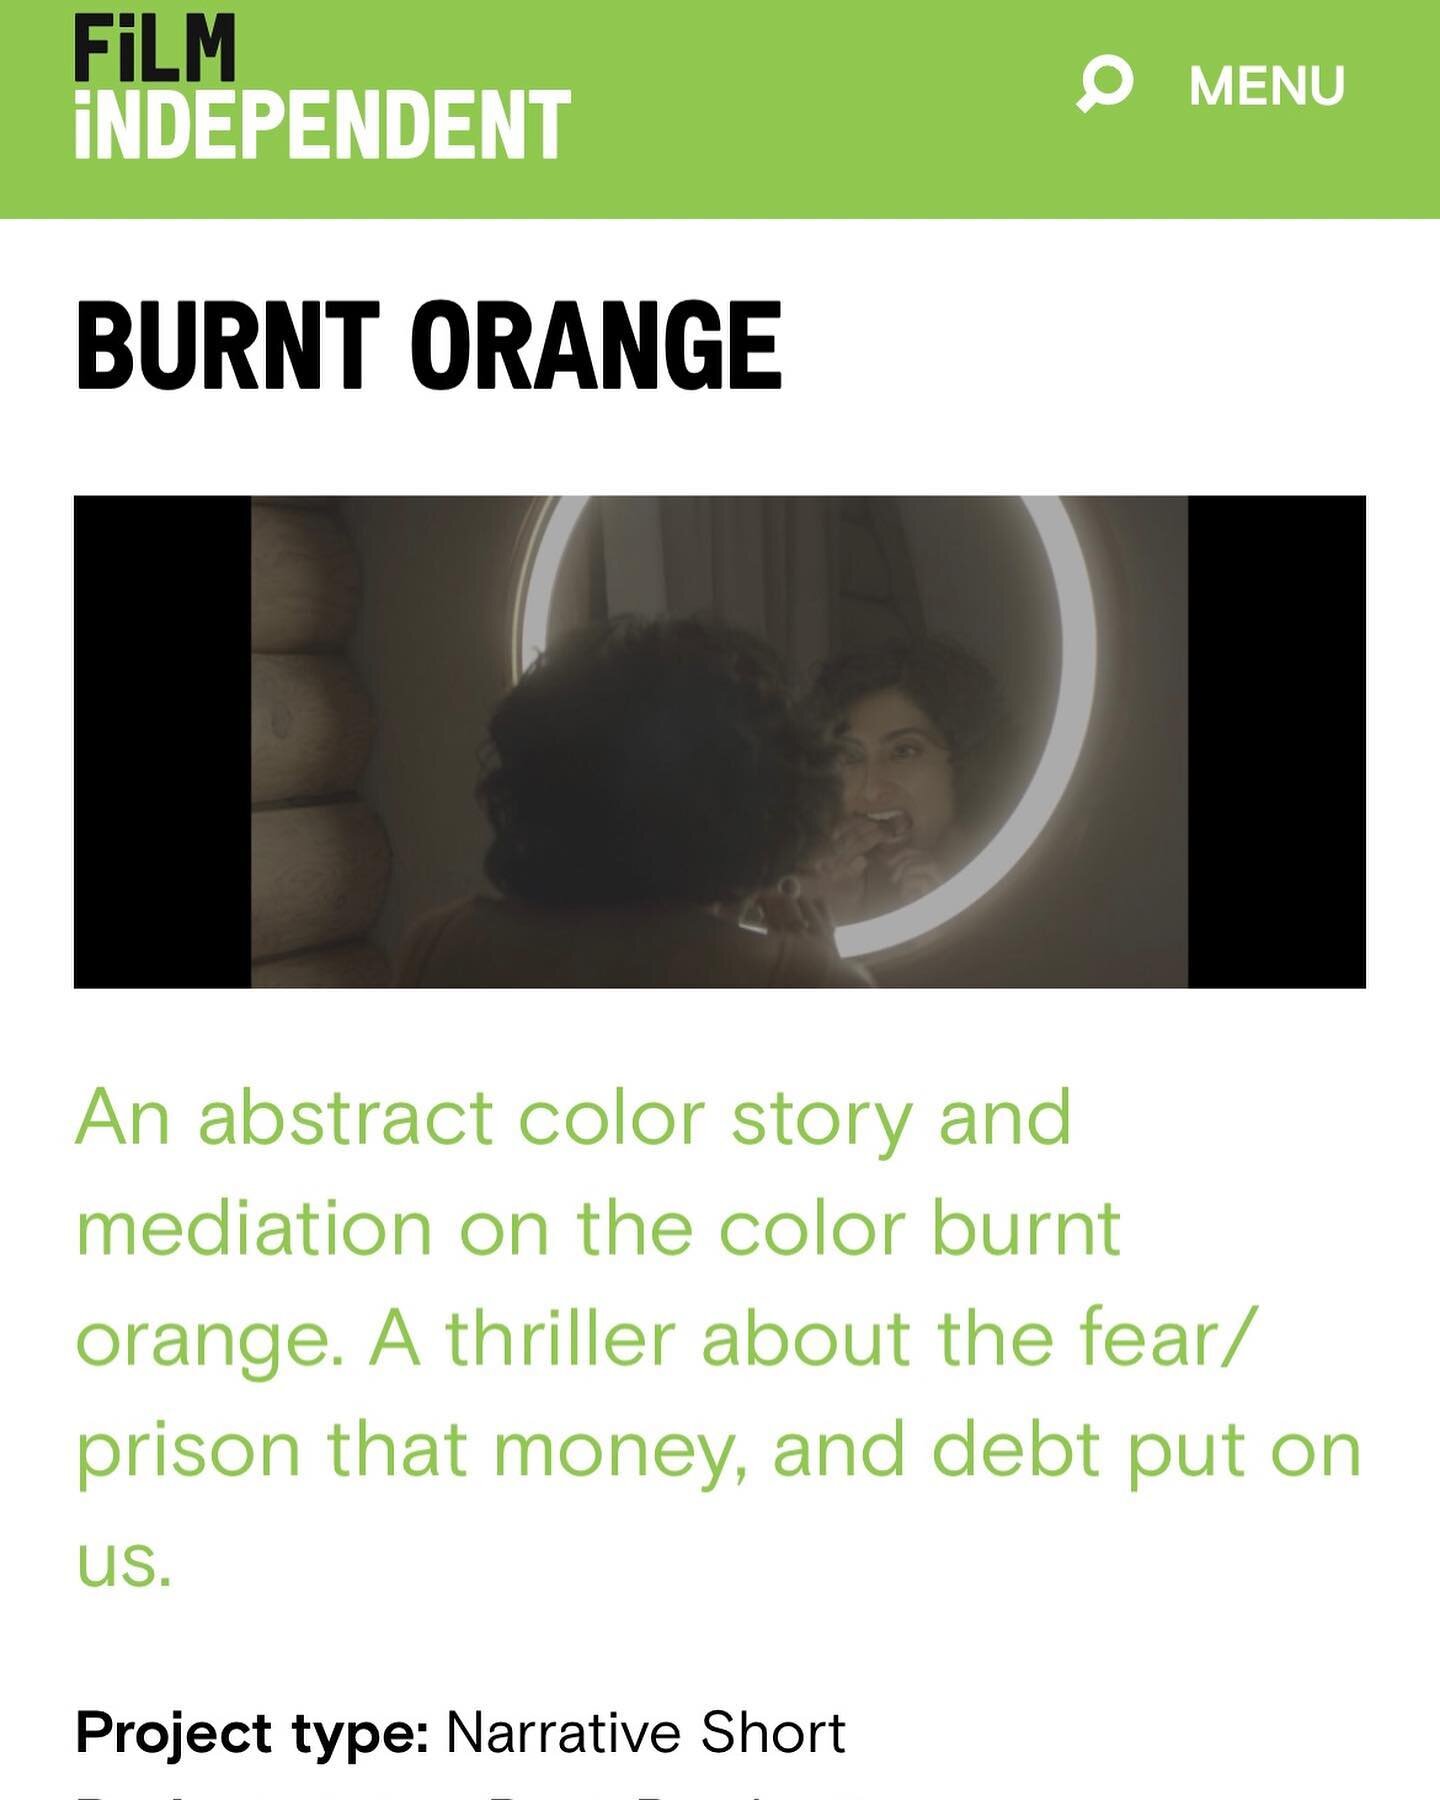 Hey all!!! 

I&rsquo;m jumping on that #givingtuesday. My project Burnt Orange is collecting donations that are tax deductible! Thanks to @filmindependent for doing what they do to help indie filmmakers make their projects come to life. 

Head to the